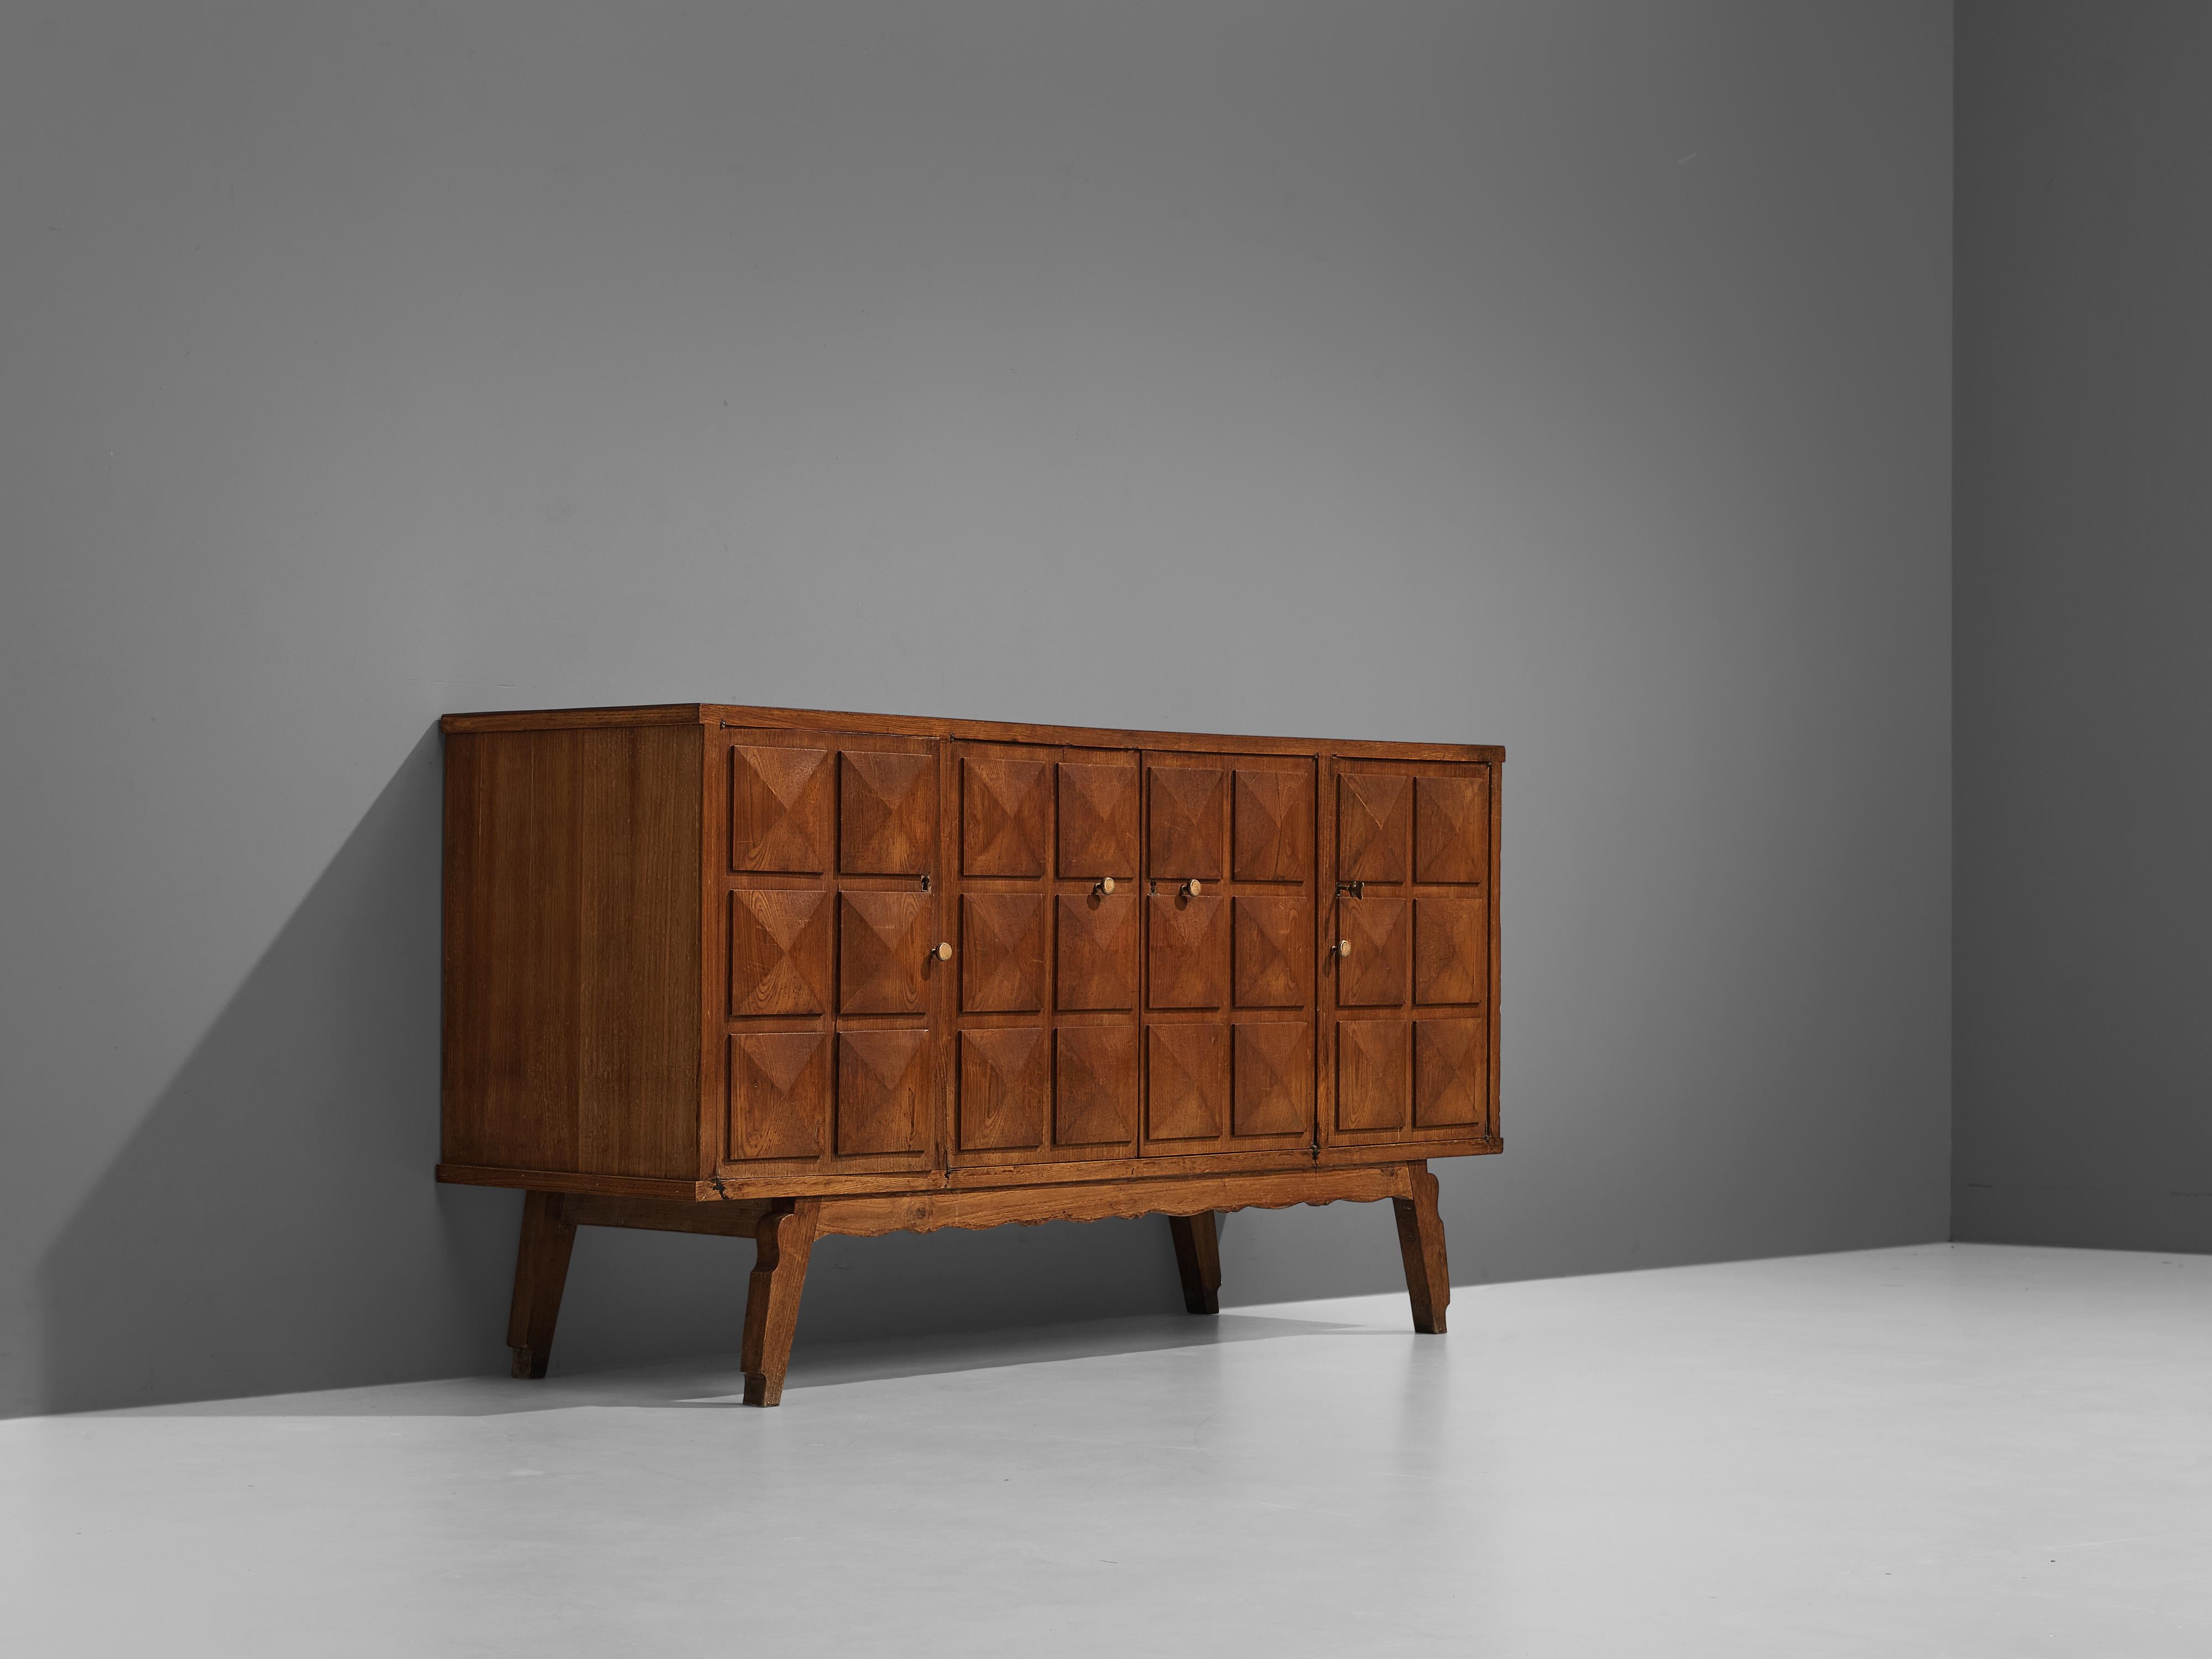 Sideboard, stained ash, brass, Italy, 1950s

Expressive sideboard in stained ash with graphical front. The designer of this Italian sideboard managed to make this functional sideboard a great visual pleasure. A combination of a pyramid-shaped relief